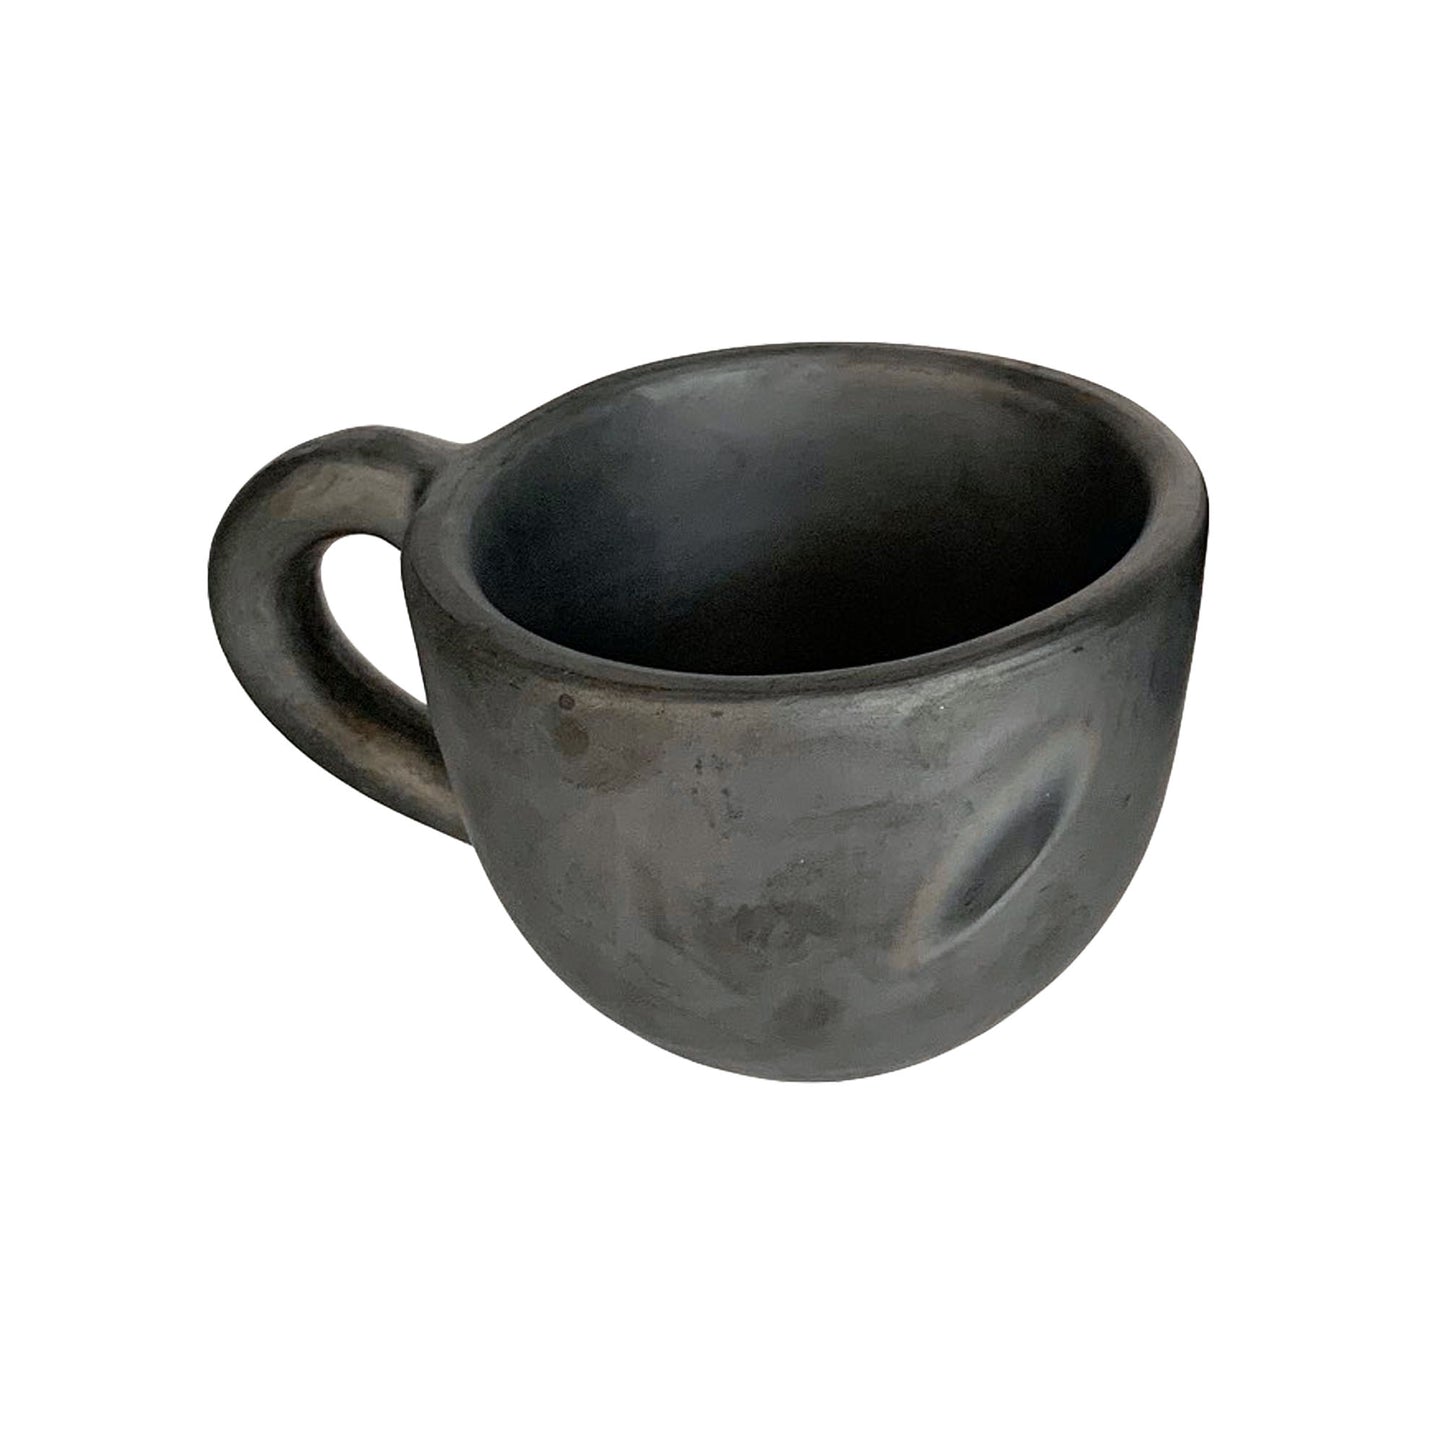 Handmade Coffee Stained Clay Cup